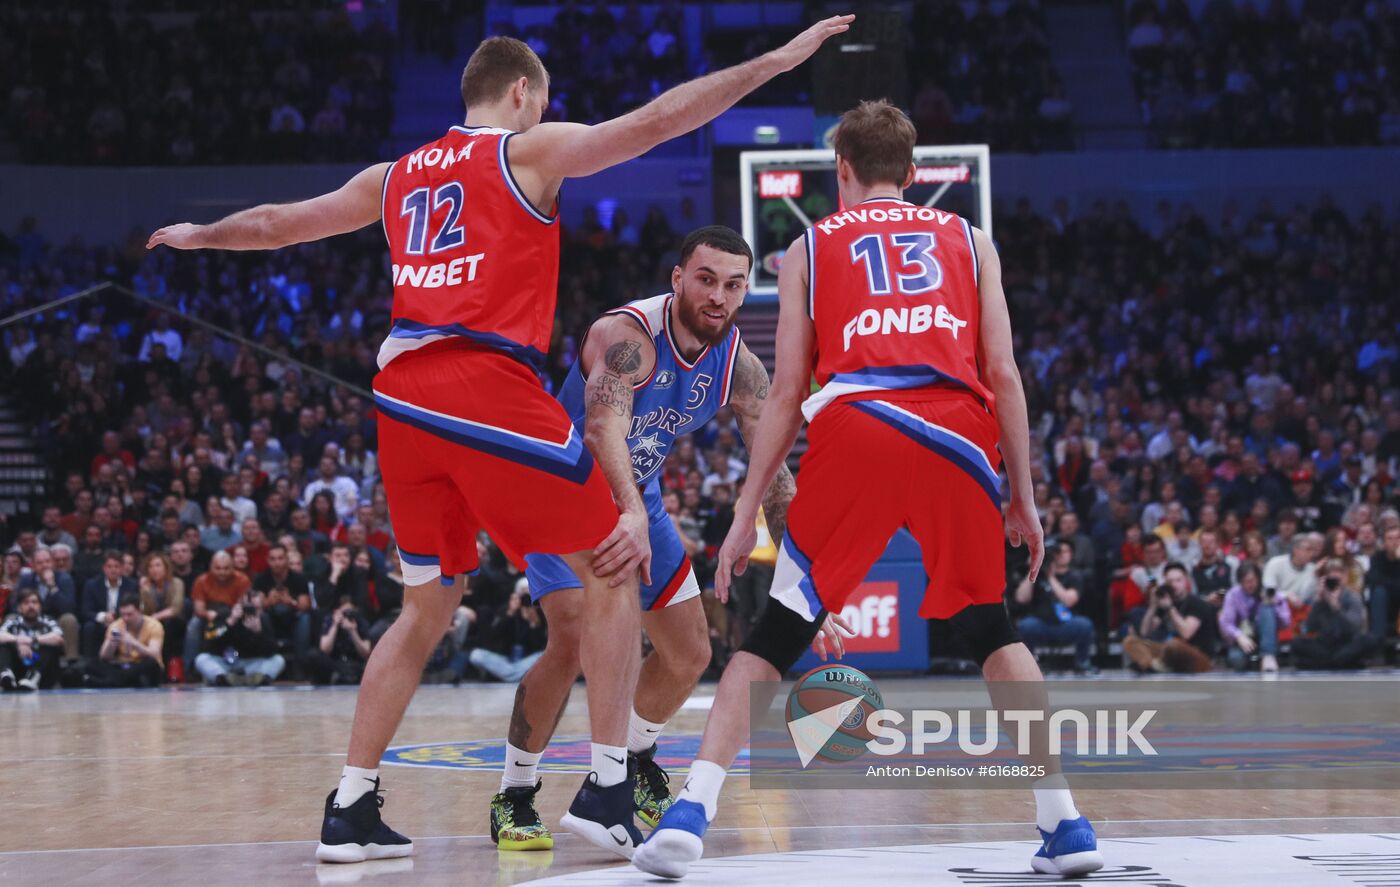 Russia Basketball All-Star Game